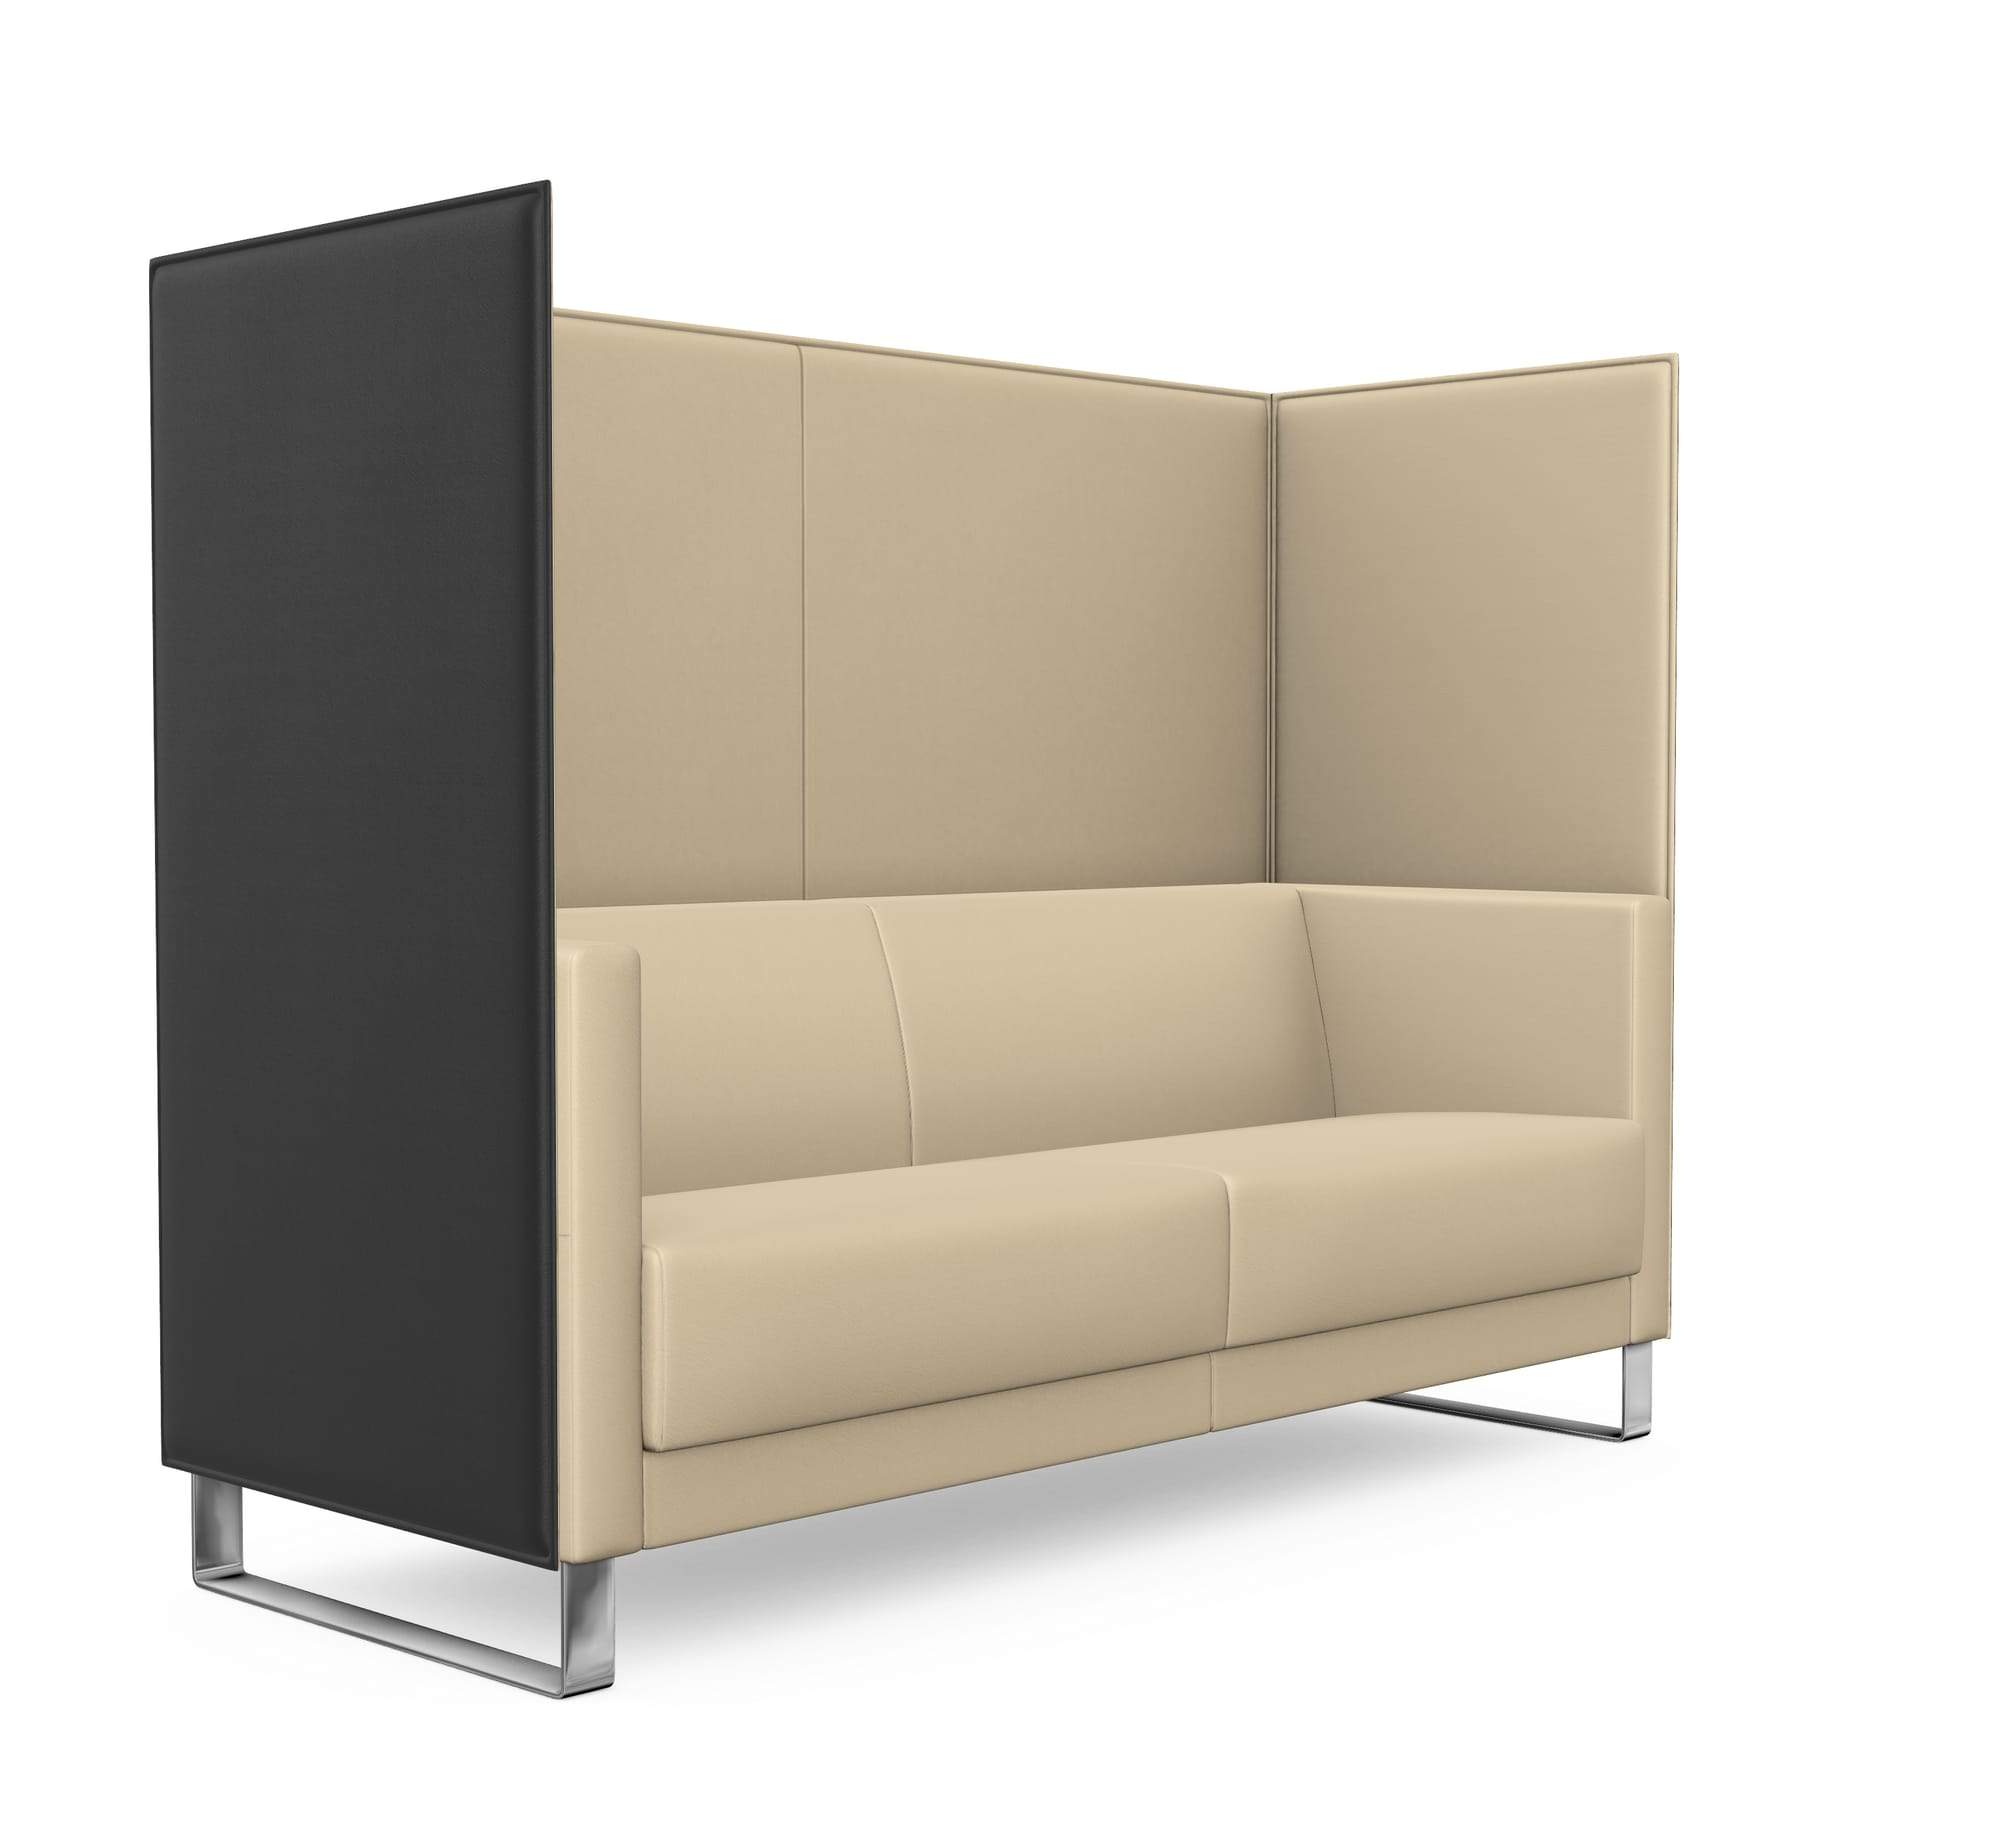 Vancouver Lite 3-Seat Sofa with Partition Walls